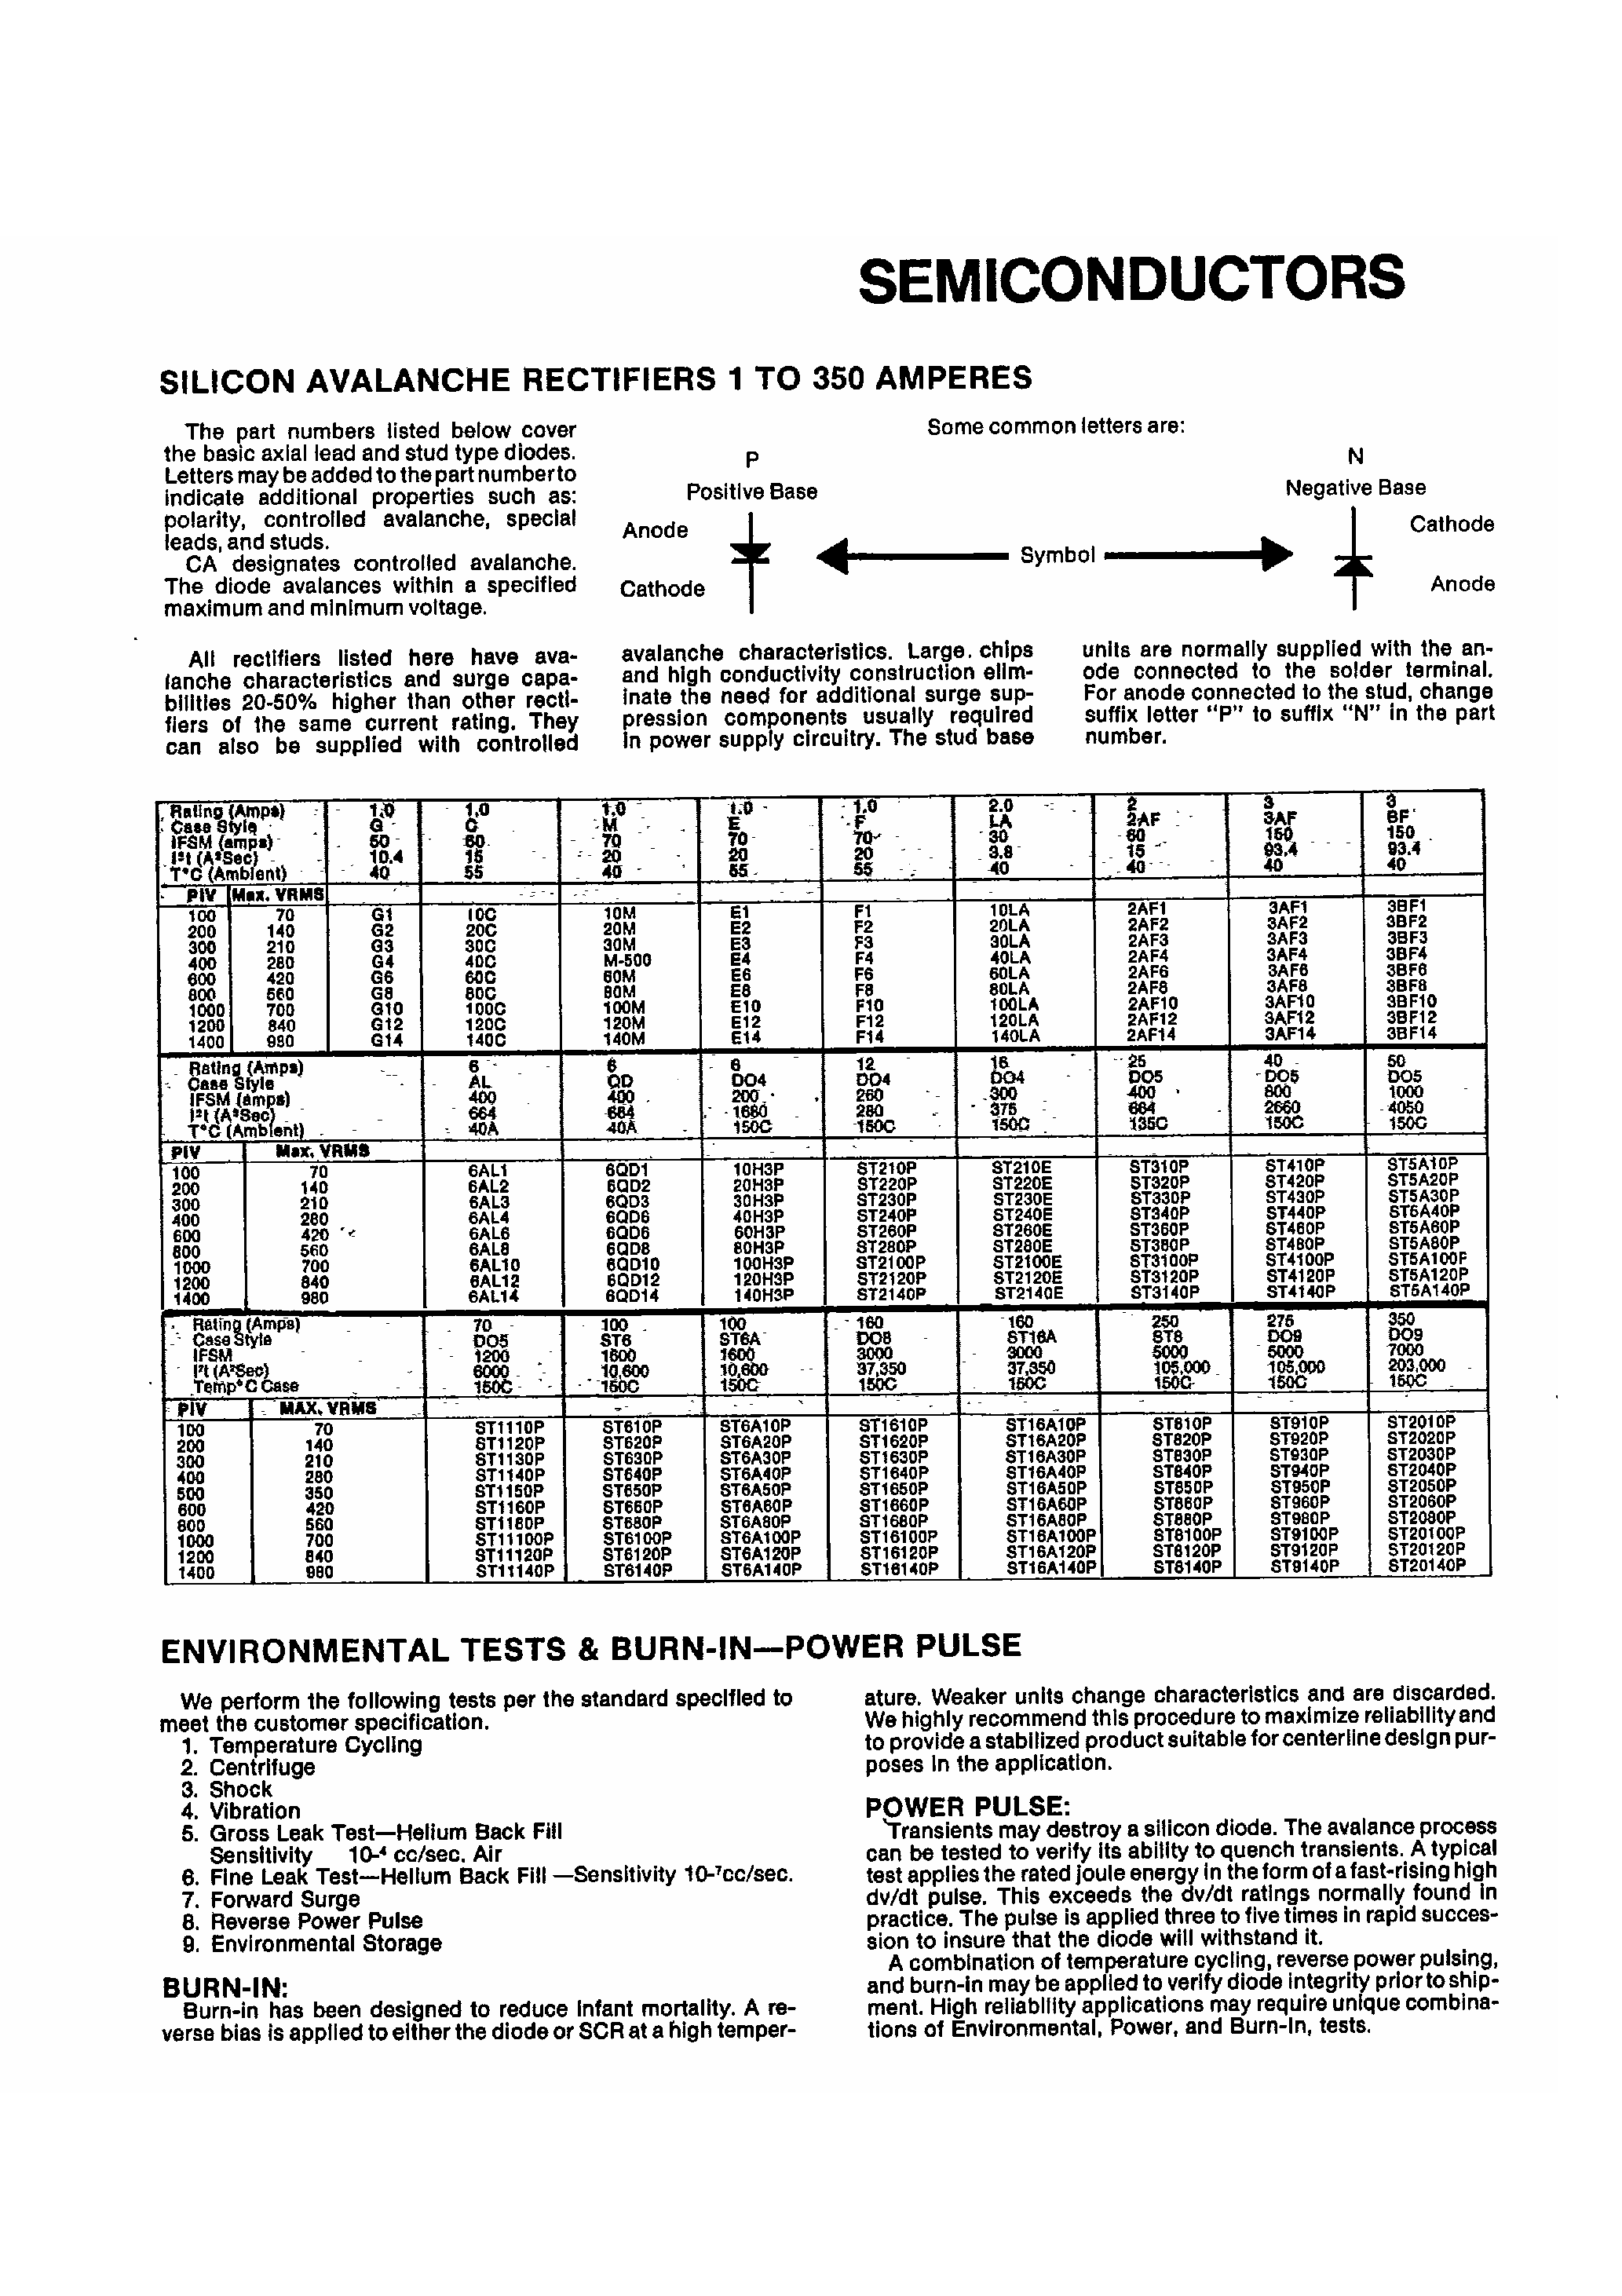 Datasheet ST6A10 - Silicon Avalanche Rectifiers 1 to 350 Amperes page 1